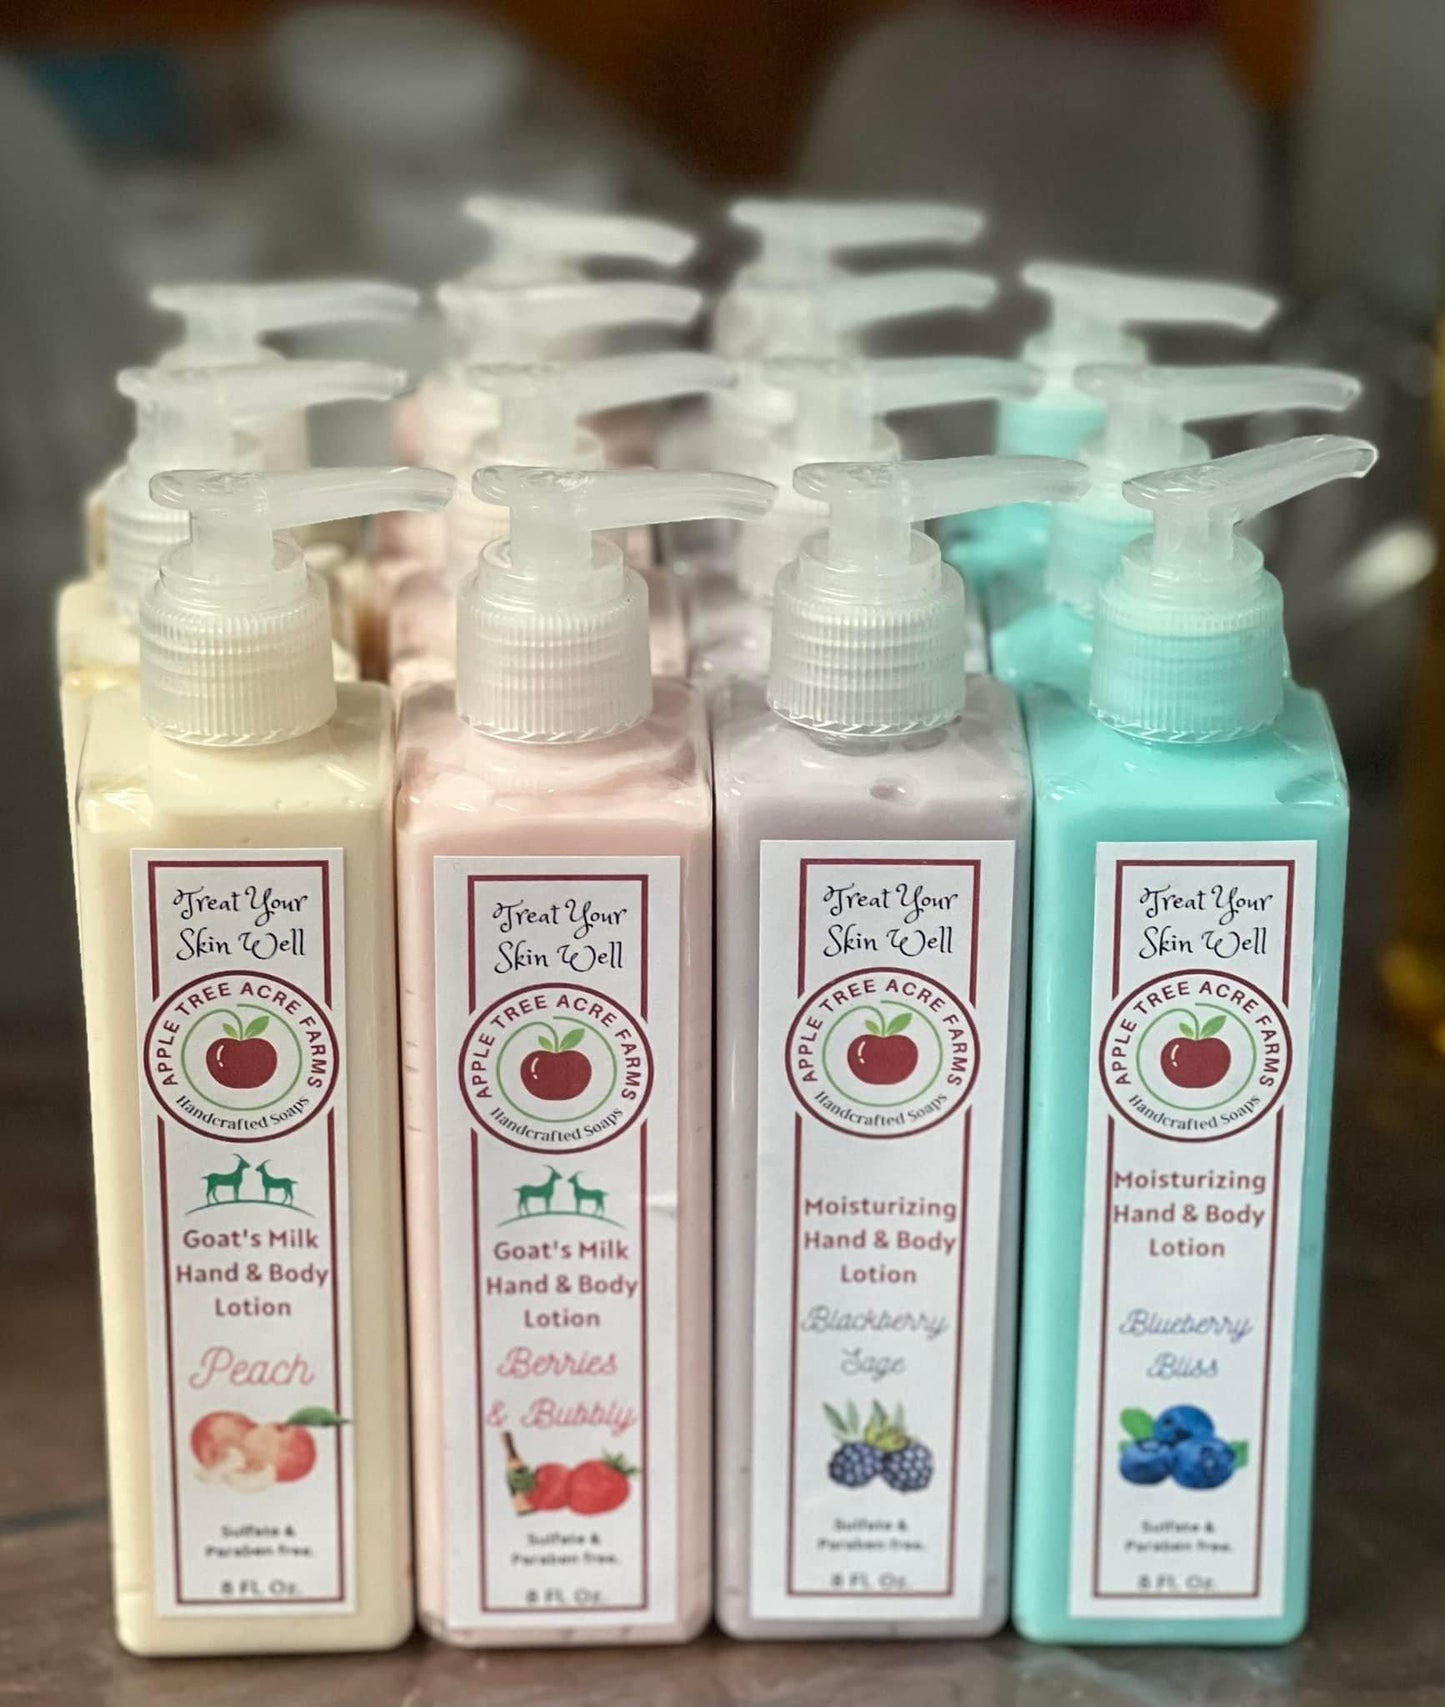 Berries & Bubbly Goat's Milk Hand & Body Lotion